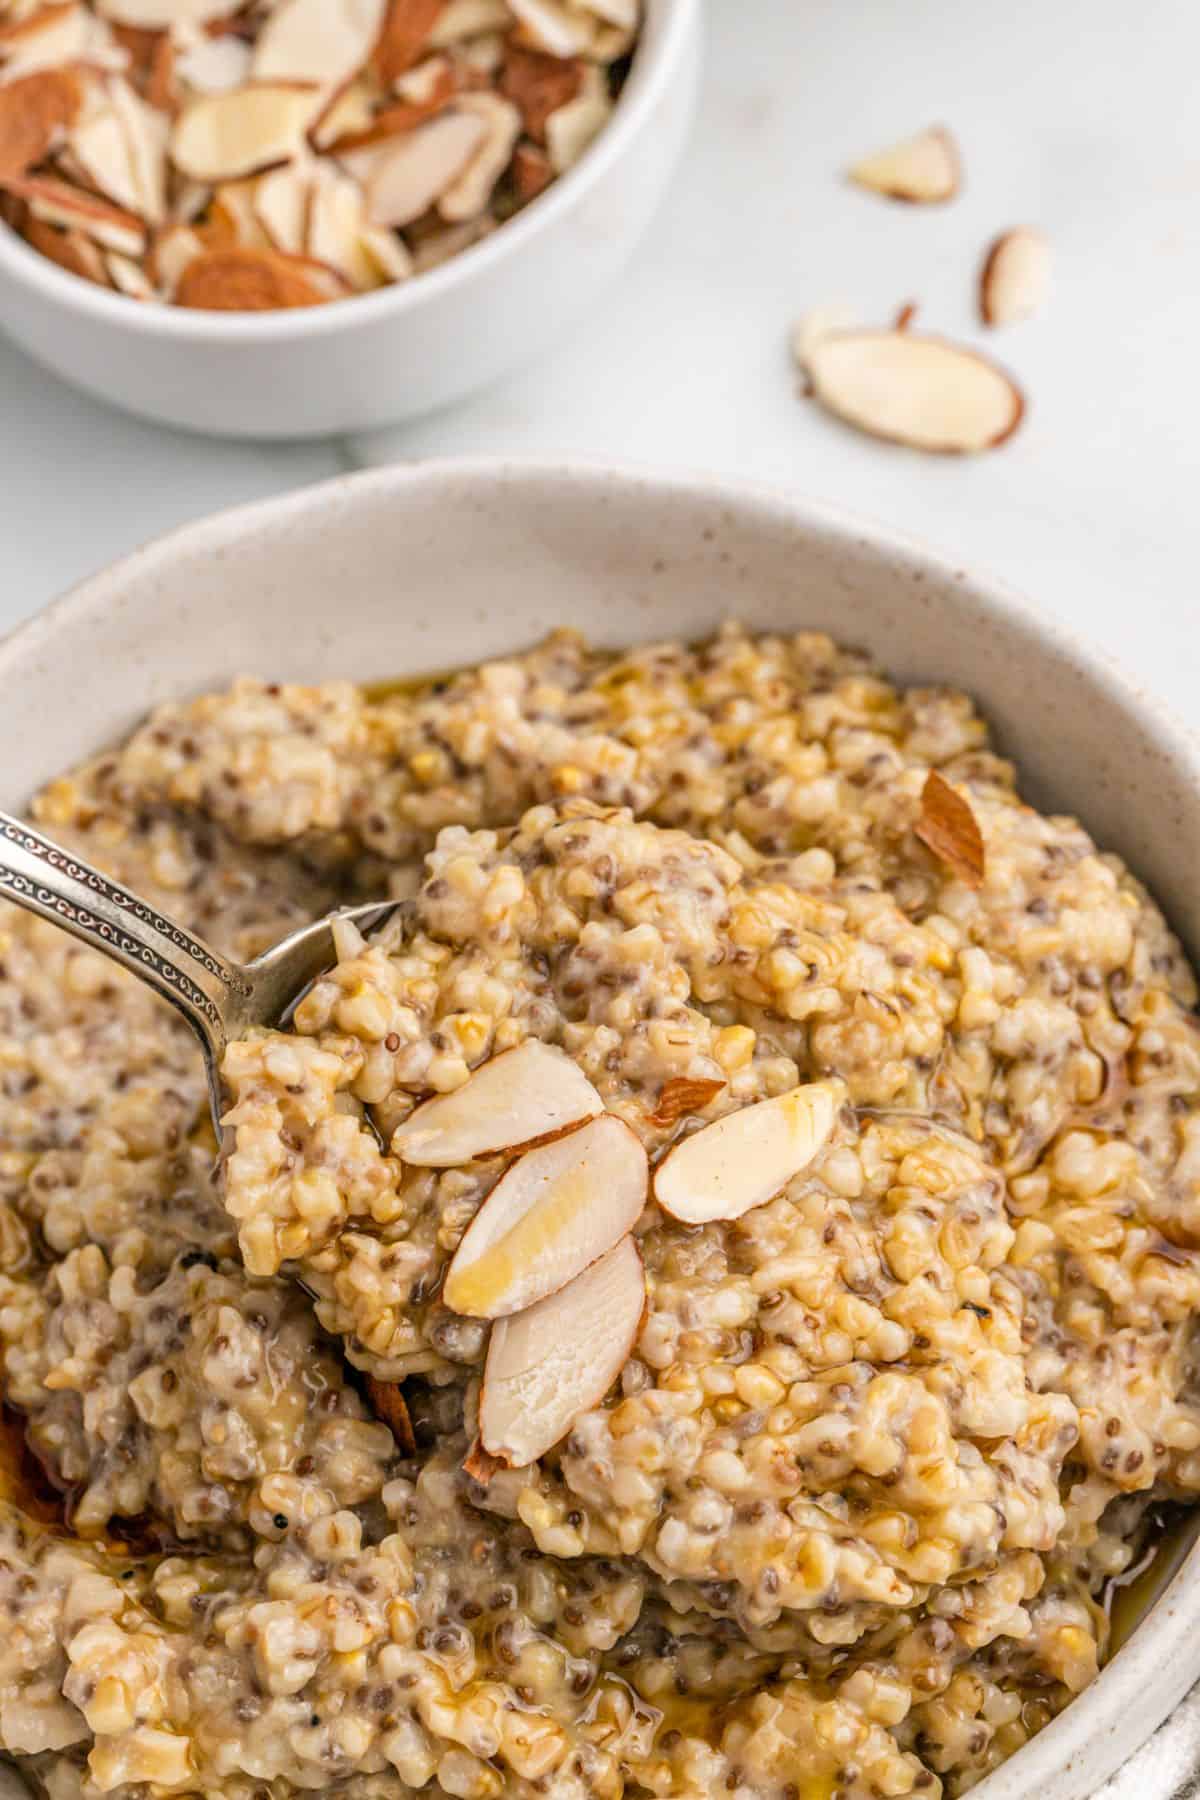 Bowl of oatmeal with slivered almonds.